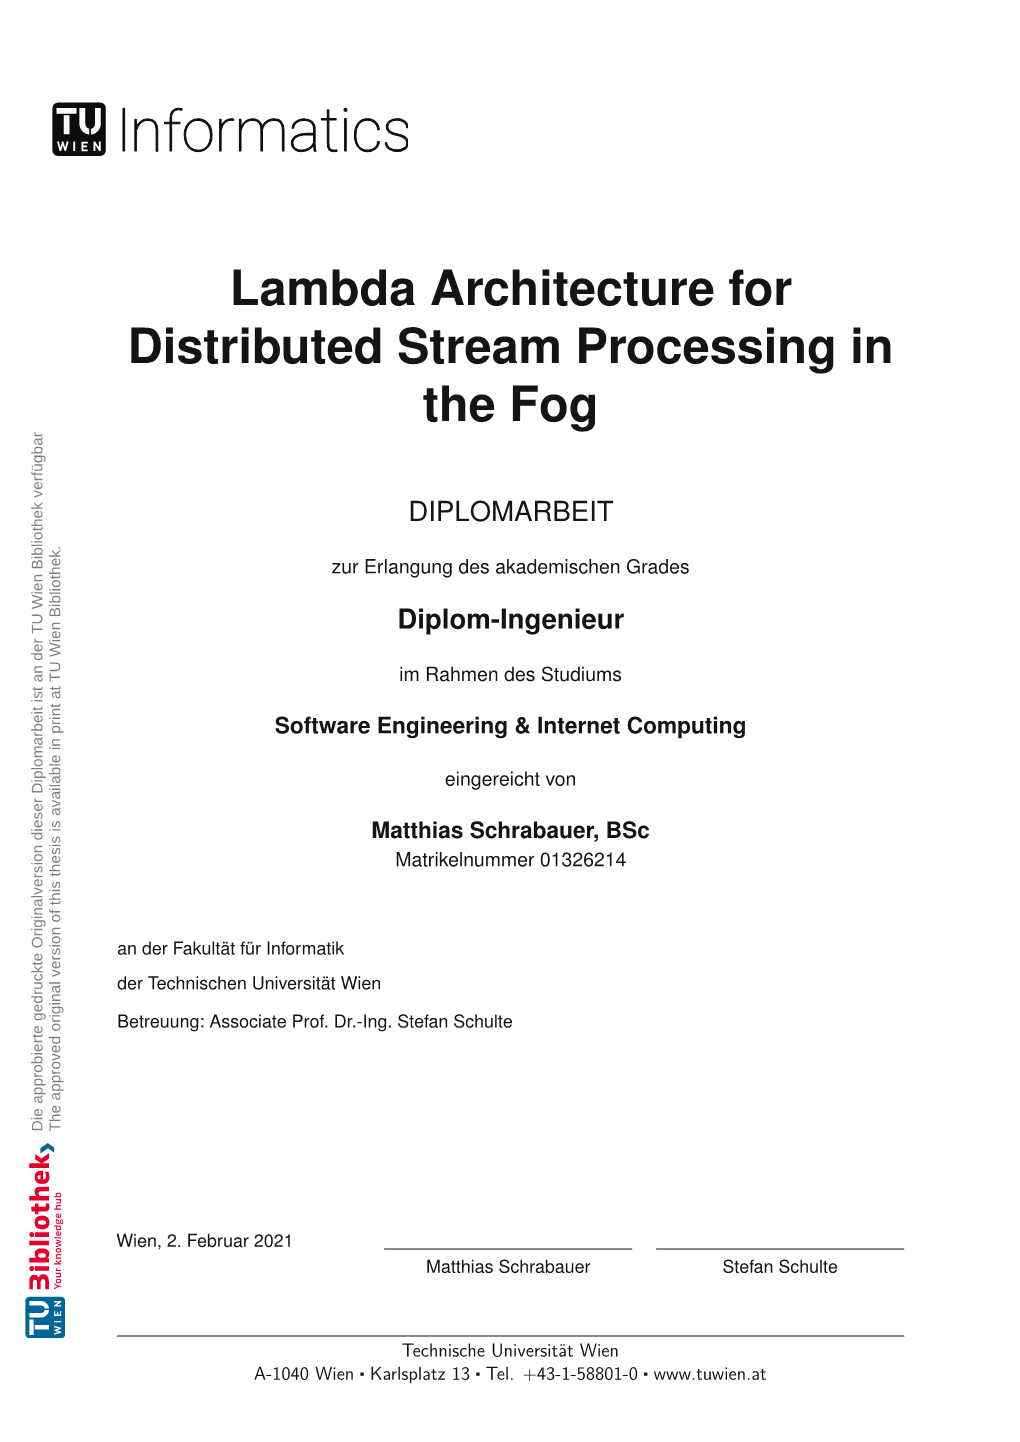 Lambda Architecture for Distributed Stream Processing in the Fog